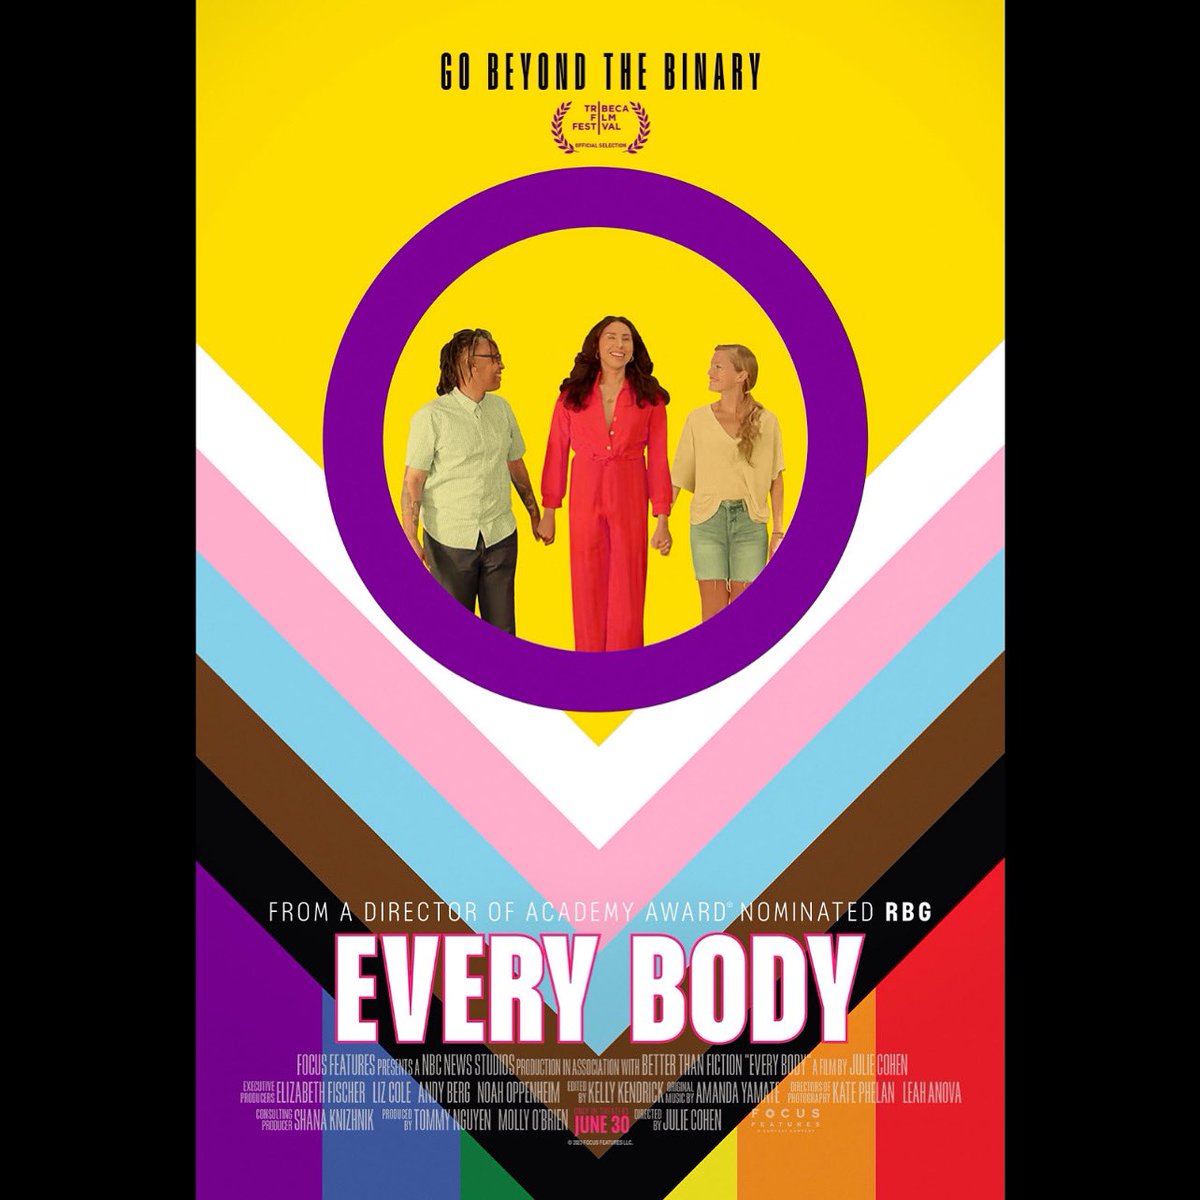 #102. Every Body
July/2/23

I hope this #documentary changes some minds. Please watch it. You might cry. 
👍

@SeanSaifaWall @xoxy_alicia #rivergallo @FilmmakerJulie #ilovefilms #films #movies #movielover #everybody #intersex #everybodyfilm #everybodymovie #everybodydocumentary